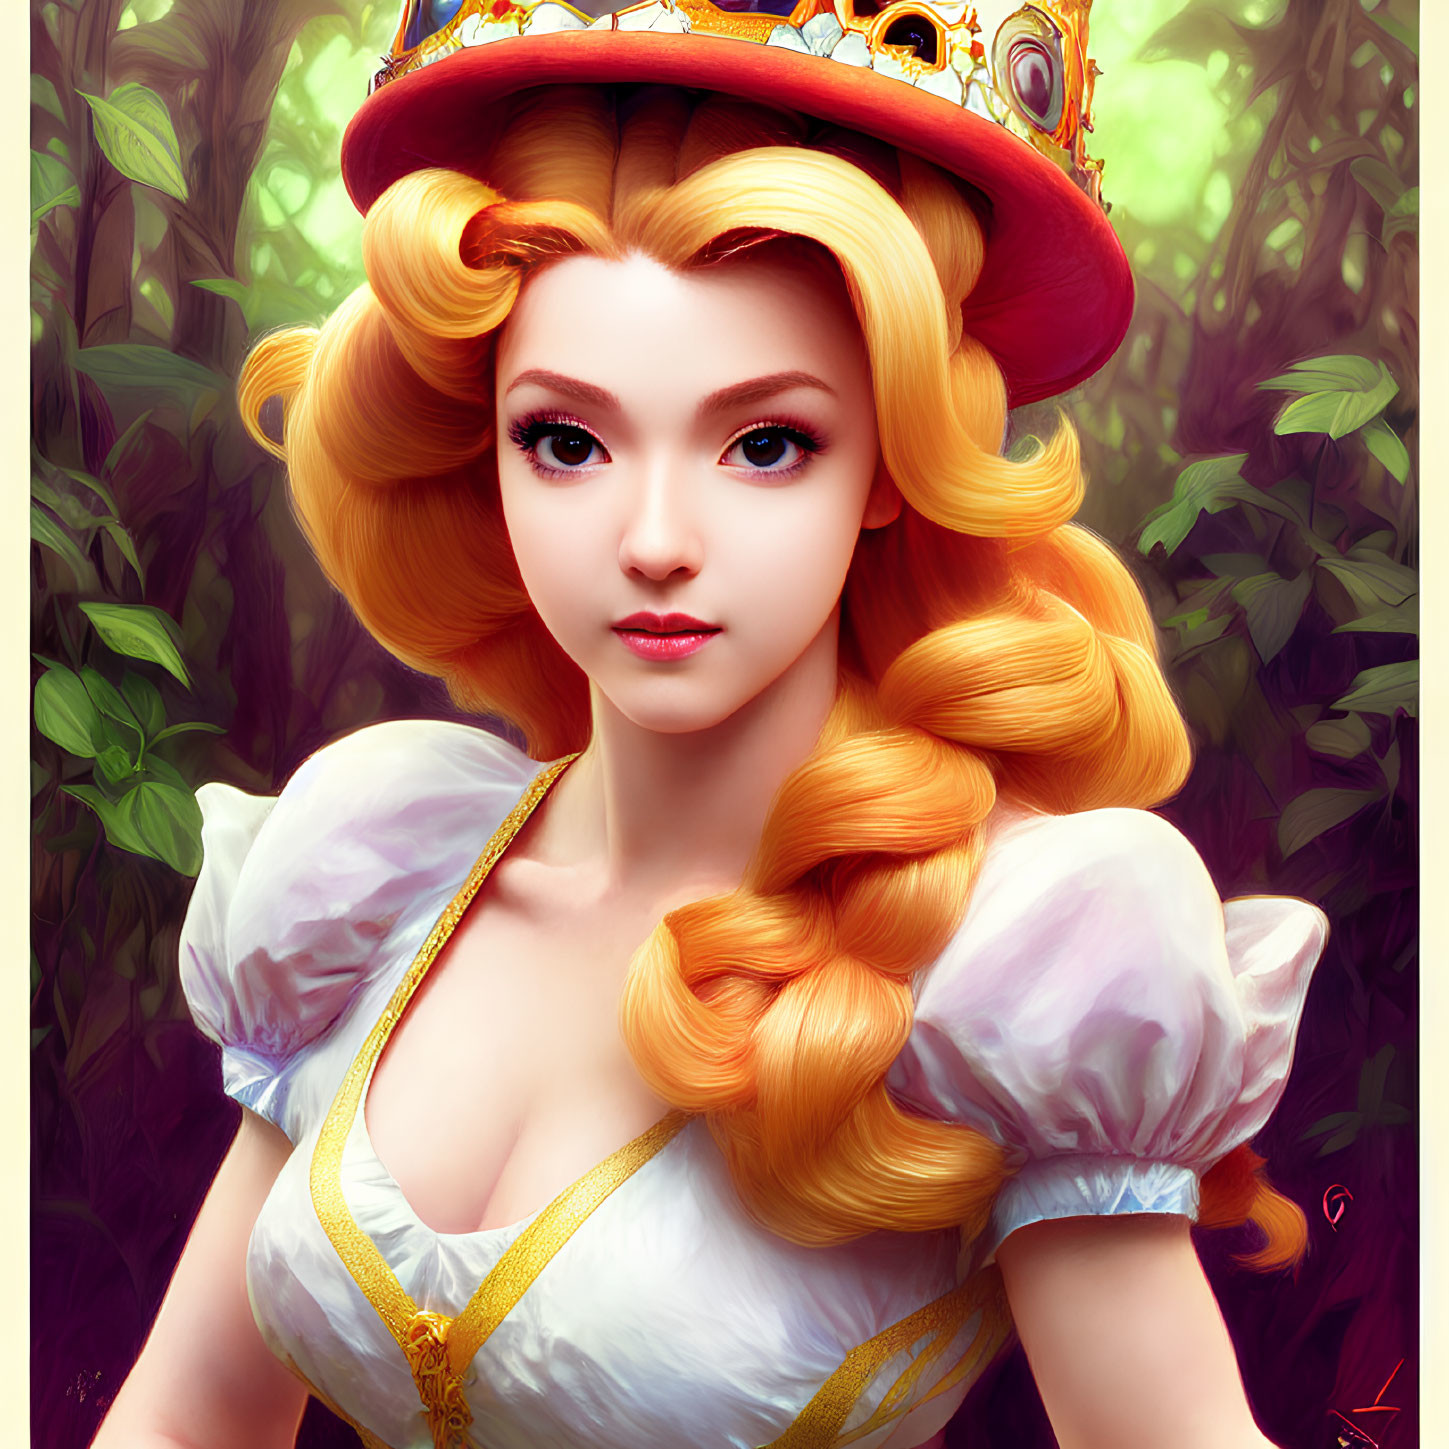 Blonde woman with crown in puffy-sleeved dress against leafy backdrop